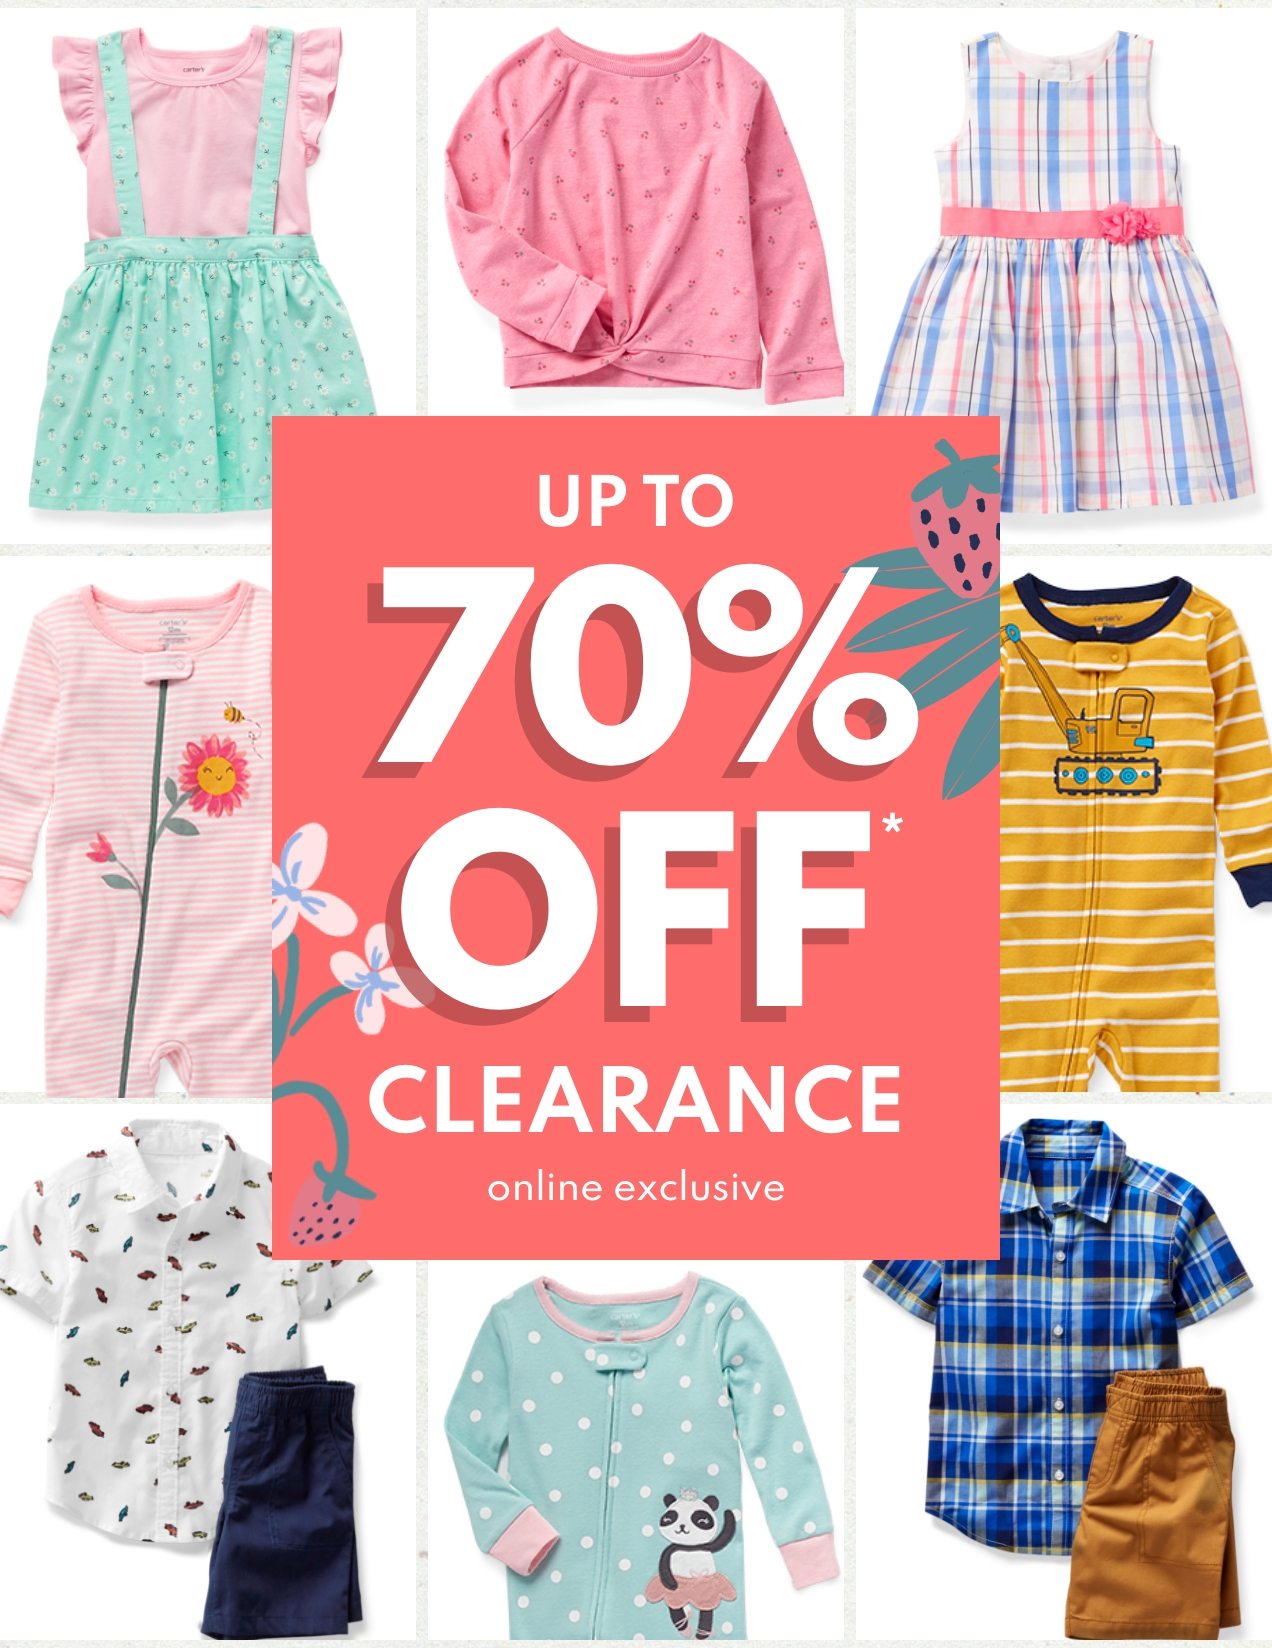 UP TO 70% OFF* CLEARANCE online exclusive 